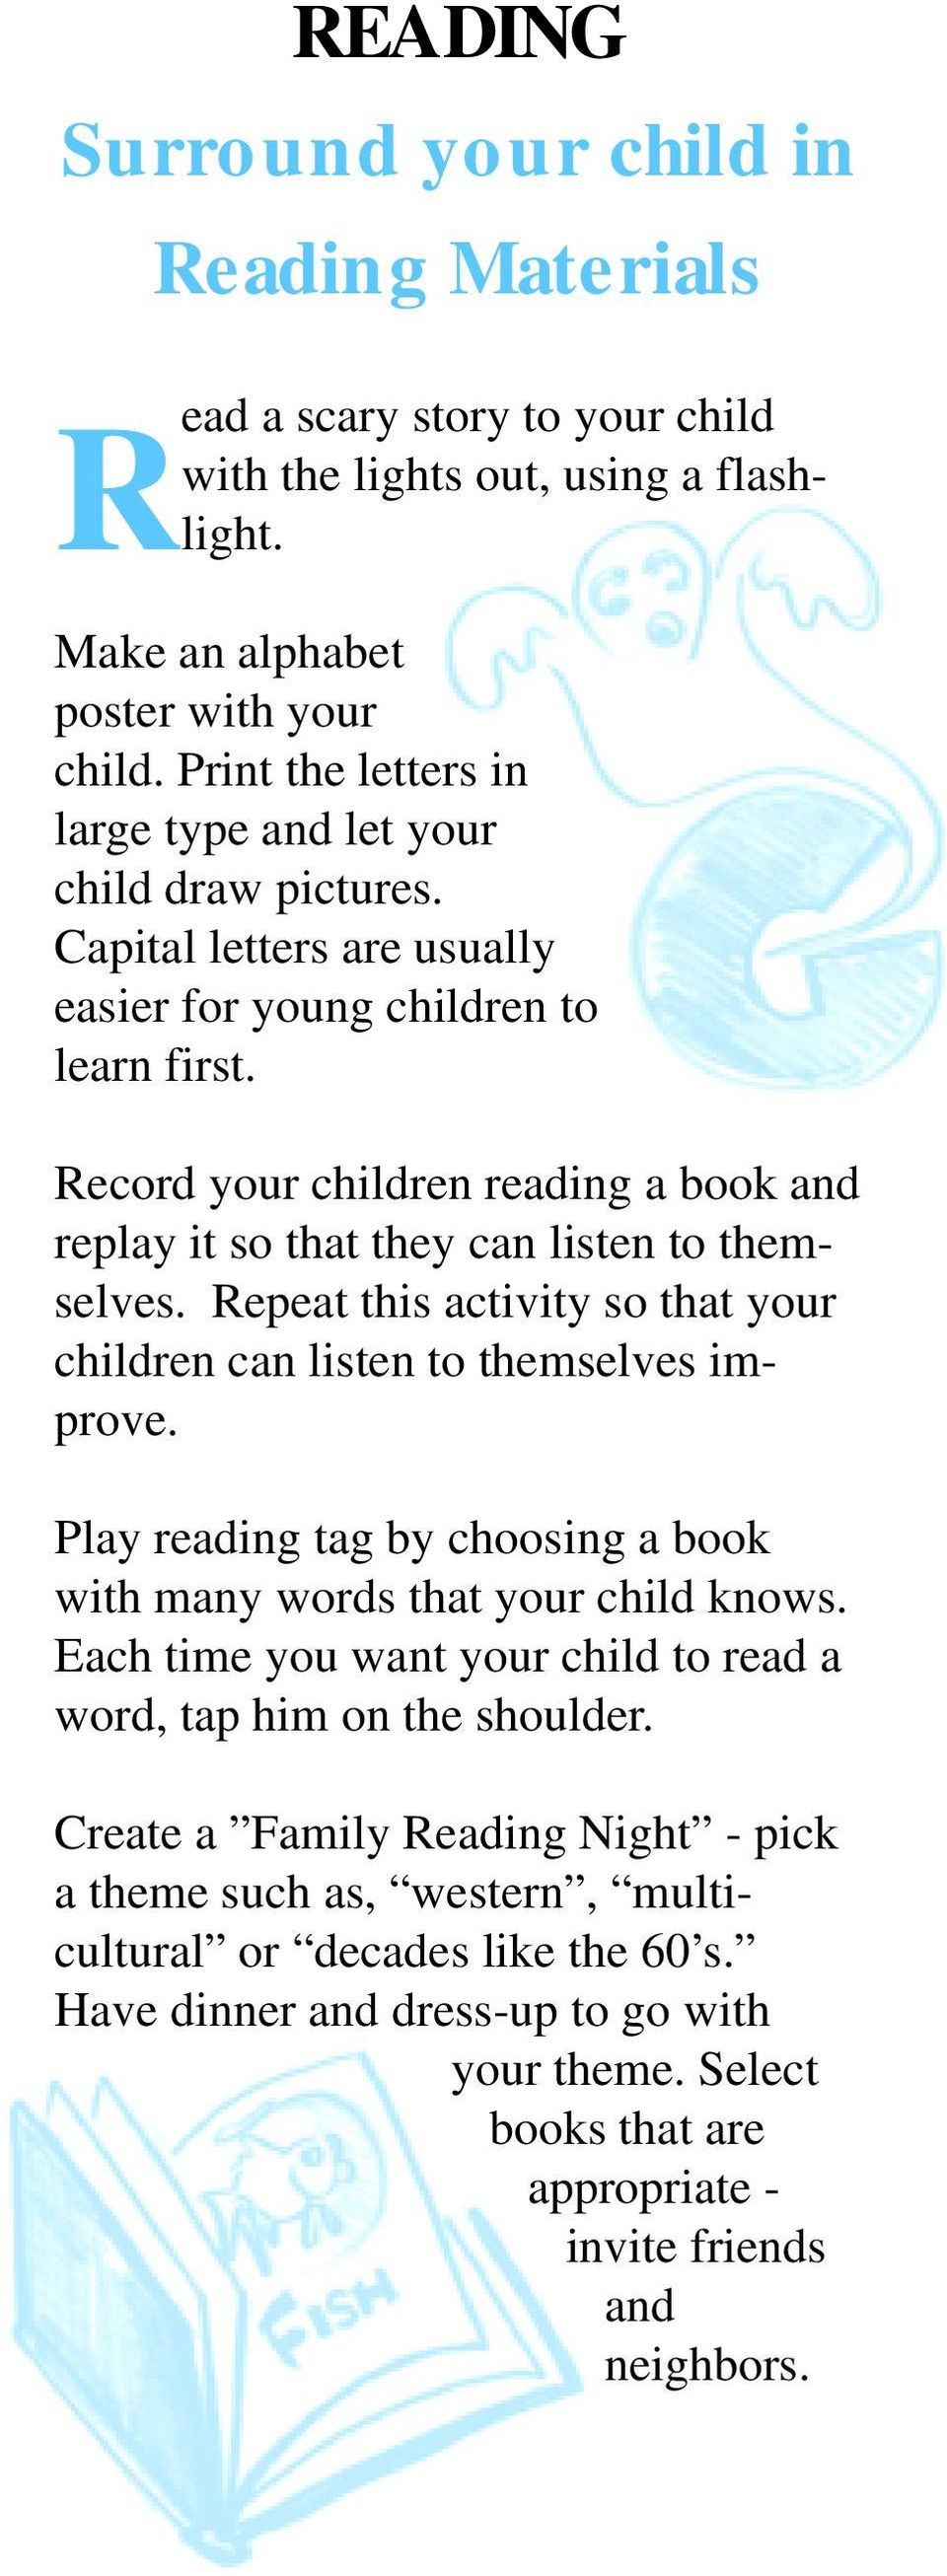 Record your children reading a book and replay it so that they can listen to themselves. Repeat this activity so that your children can listen to themselves improve.